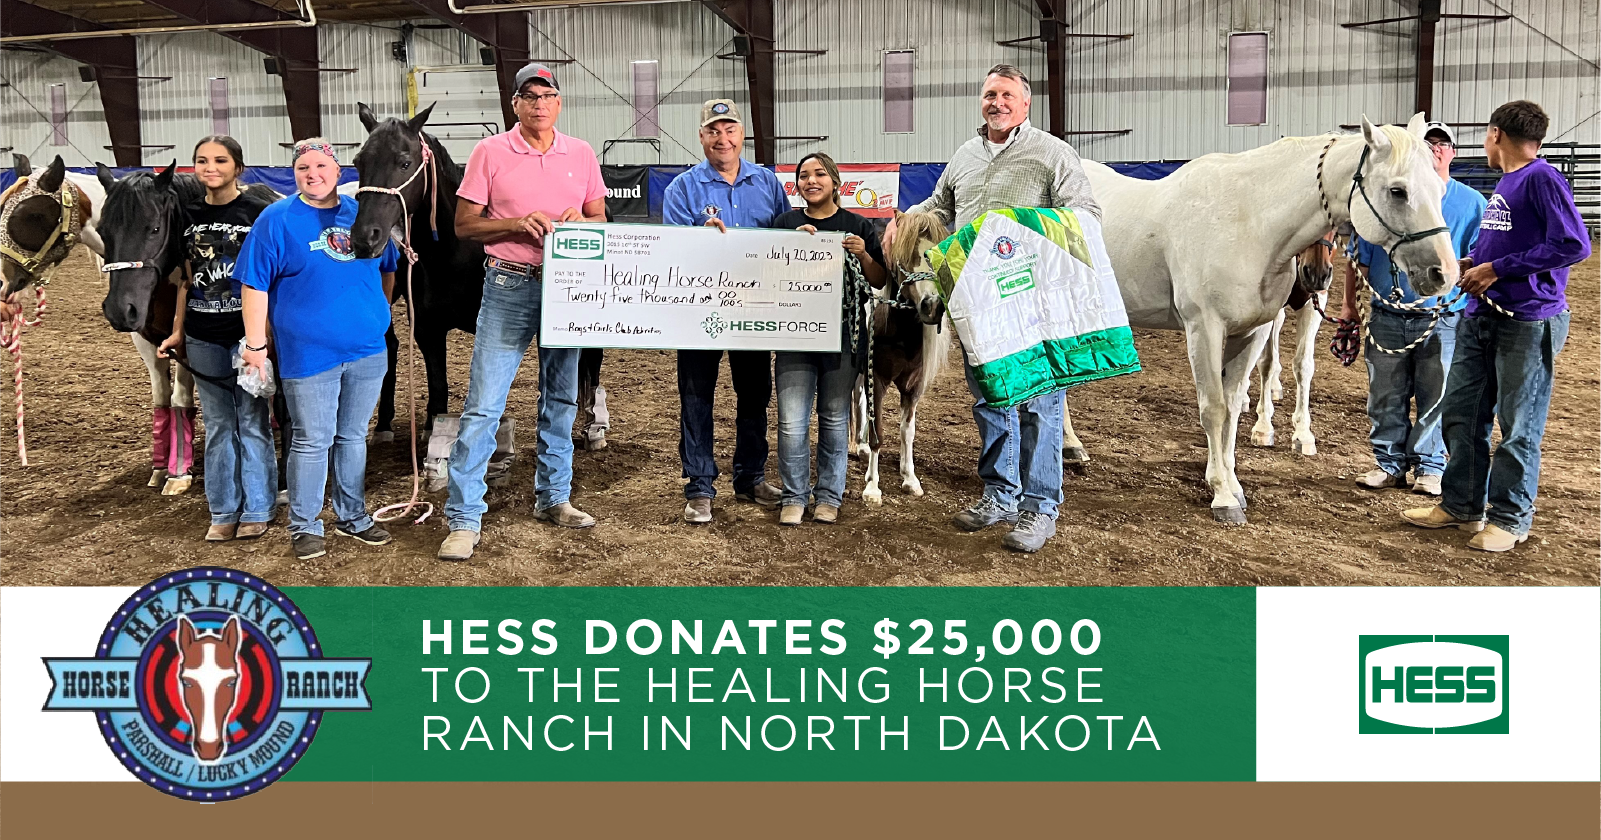 Hess Donates $25,000 to the Healing Horse Ranch